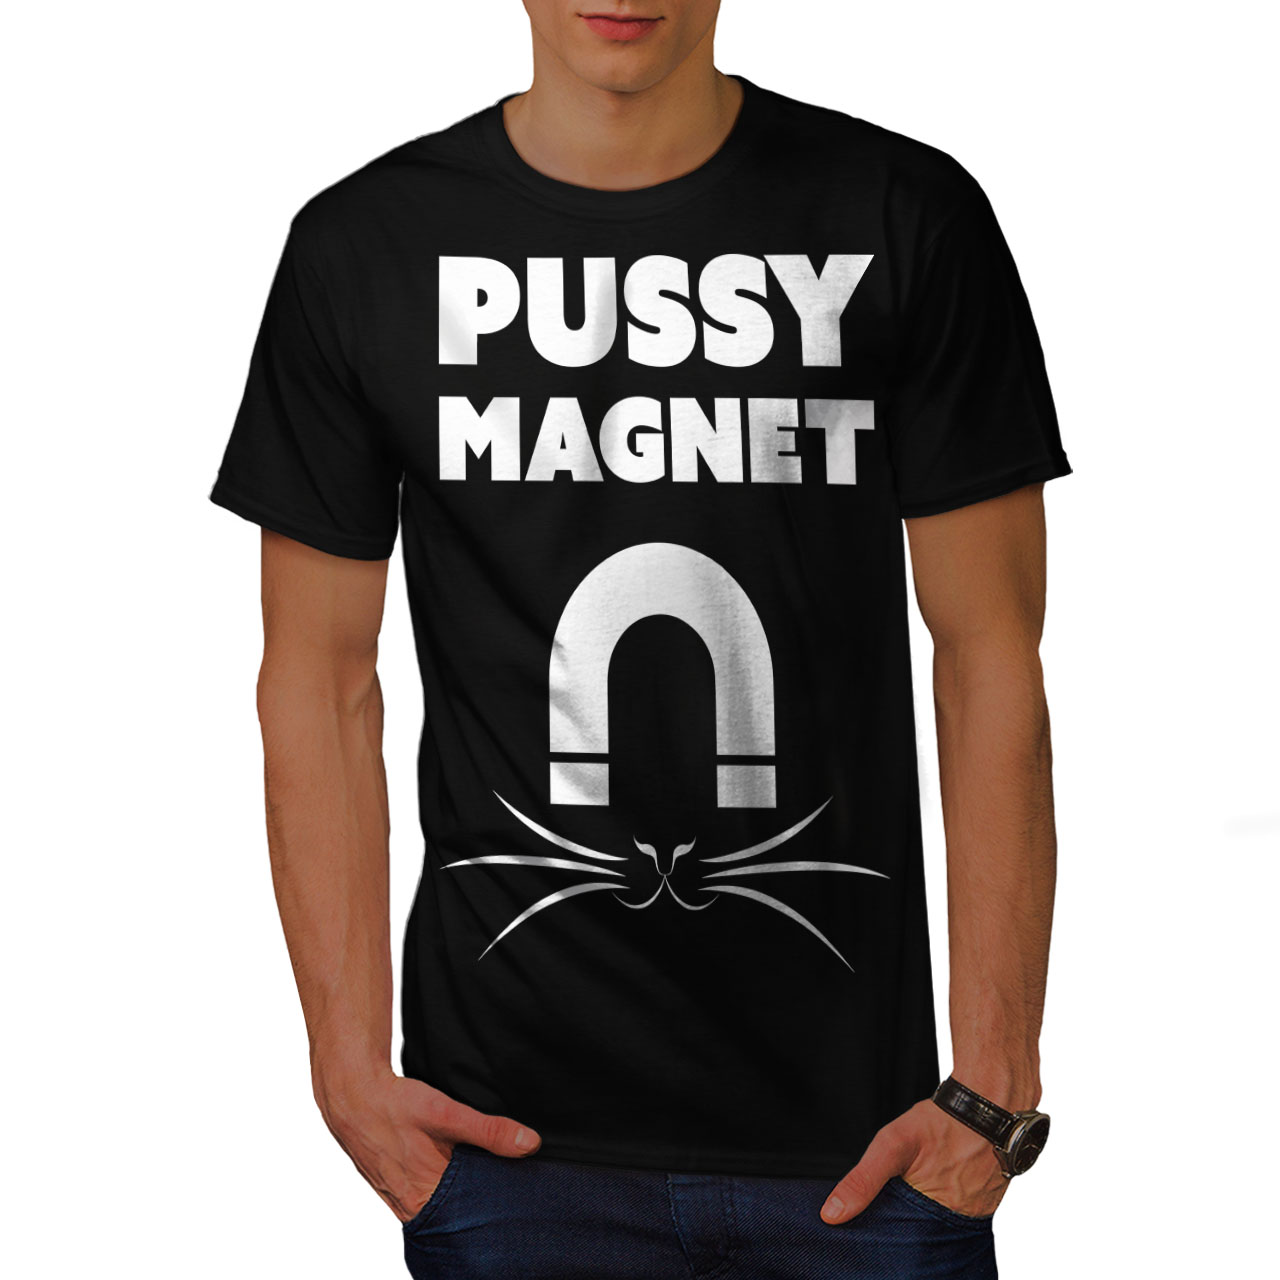 Wellcoda Pussy Magnet Cool Mens T Shirt Magnet Graphic Design Printed 